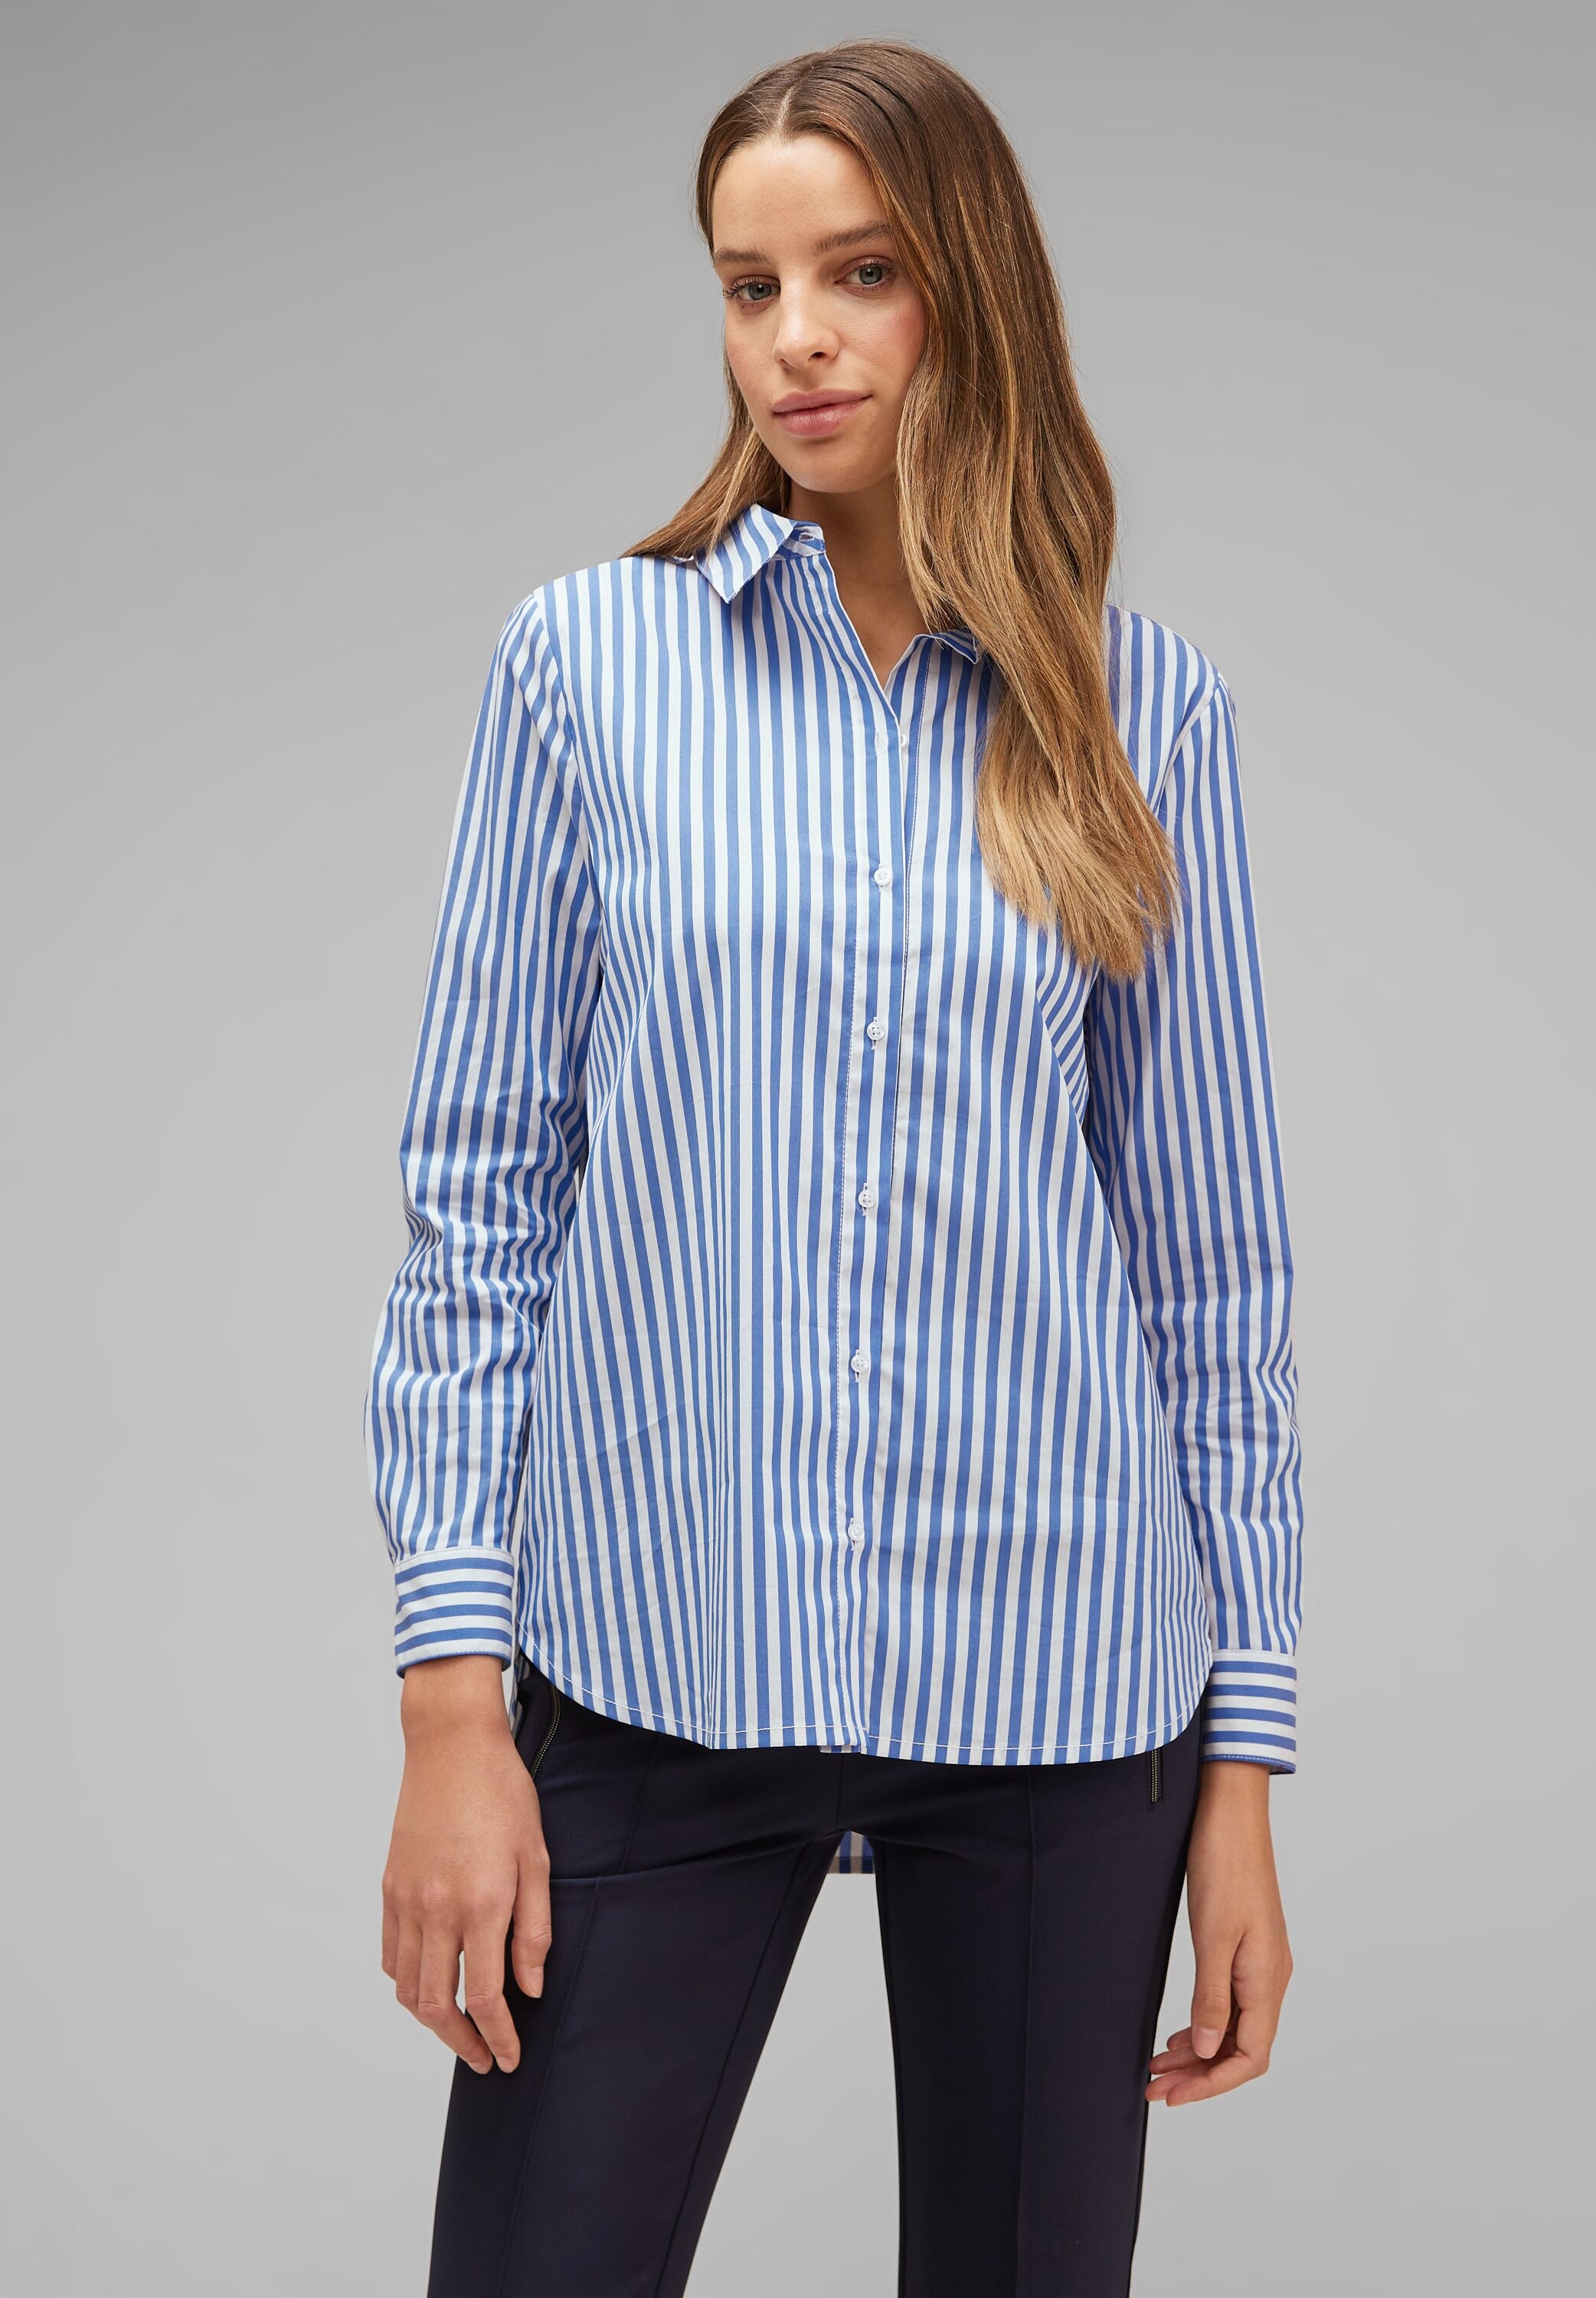 STREET ONE Longbluse »Striped Office Blouse«, mit Streifenmuster bei ♕